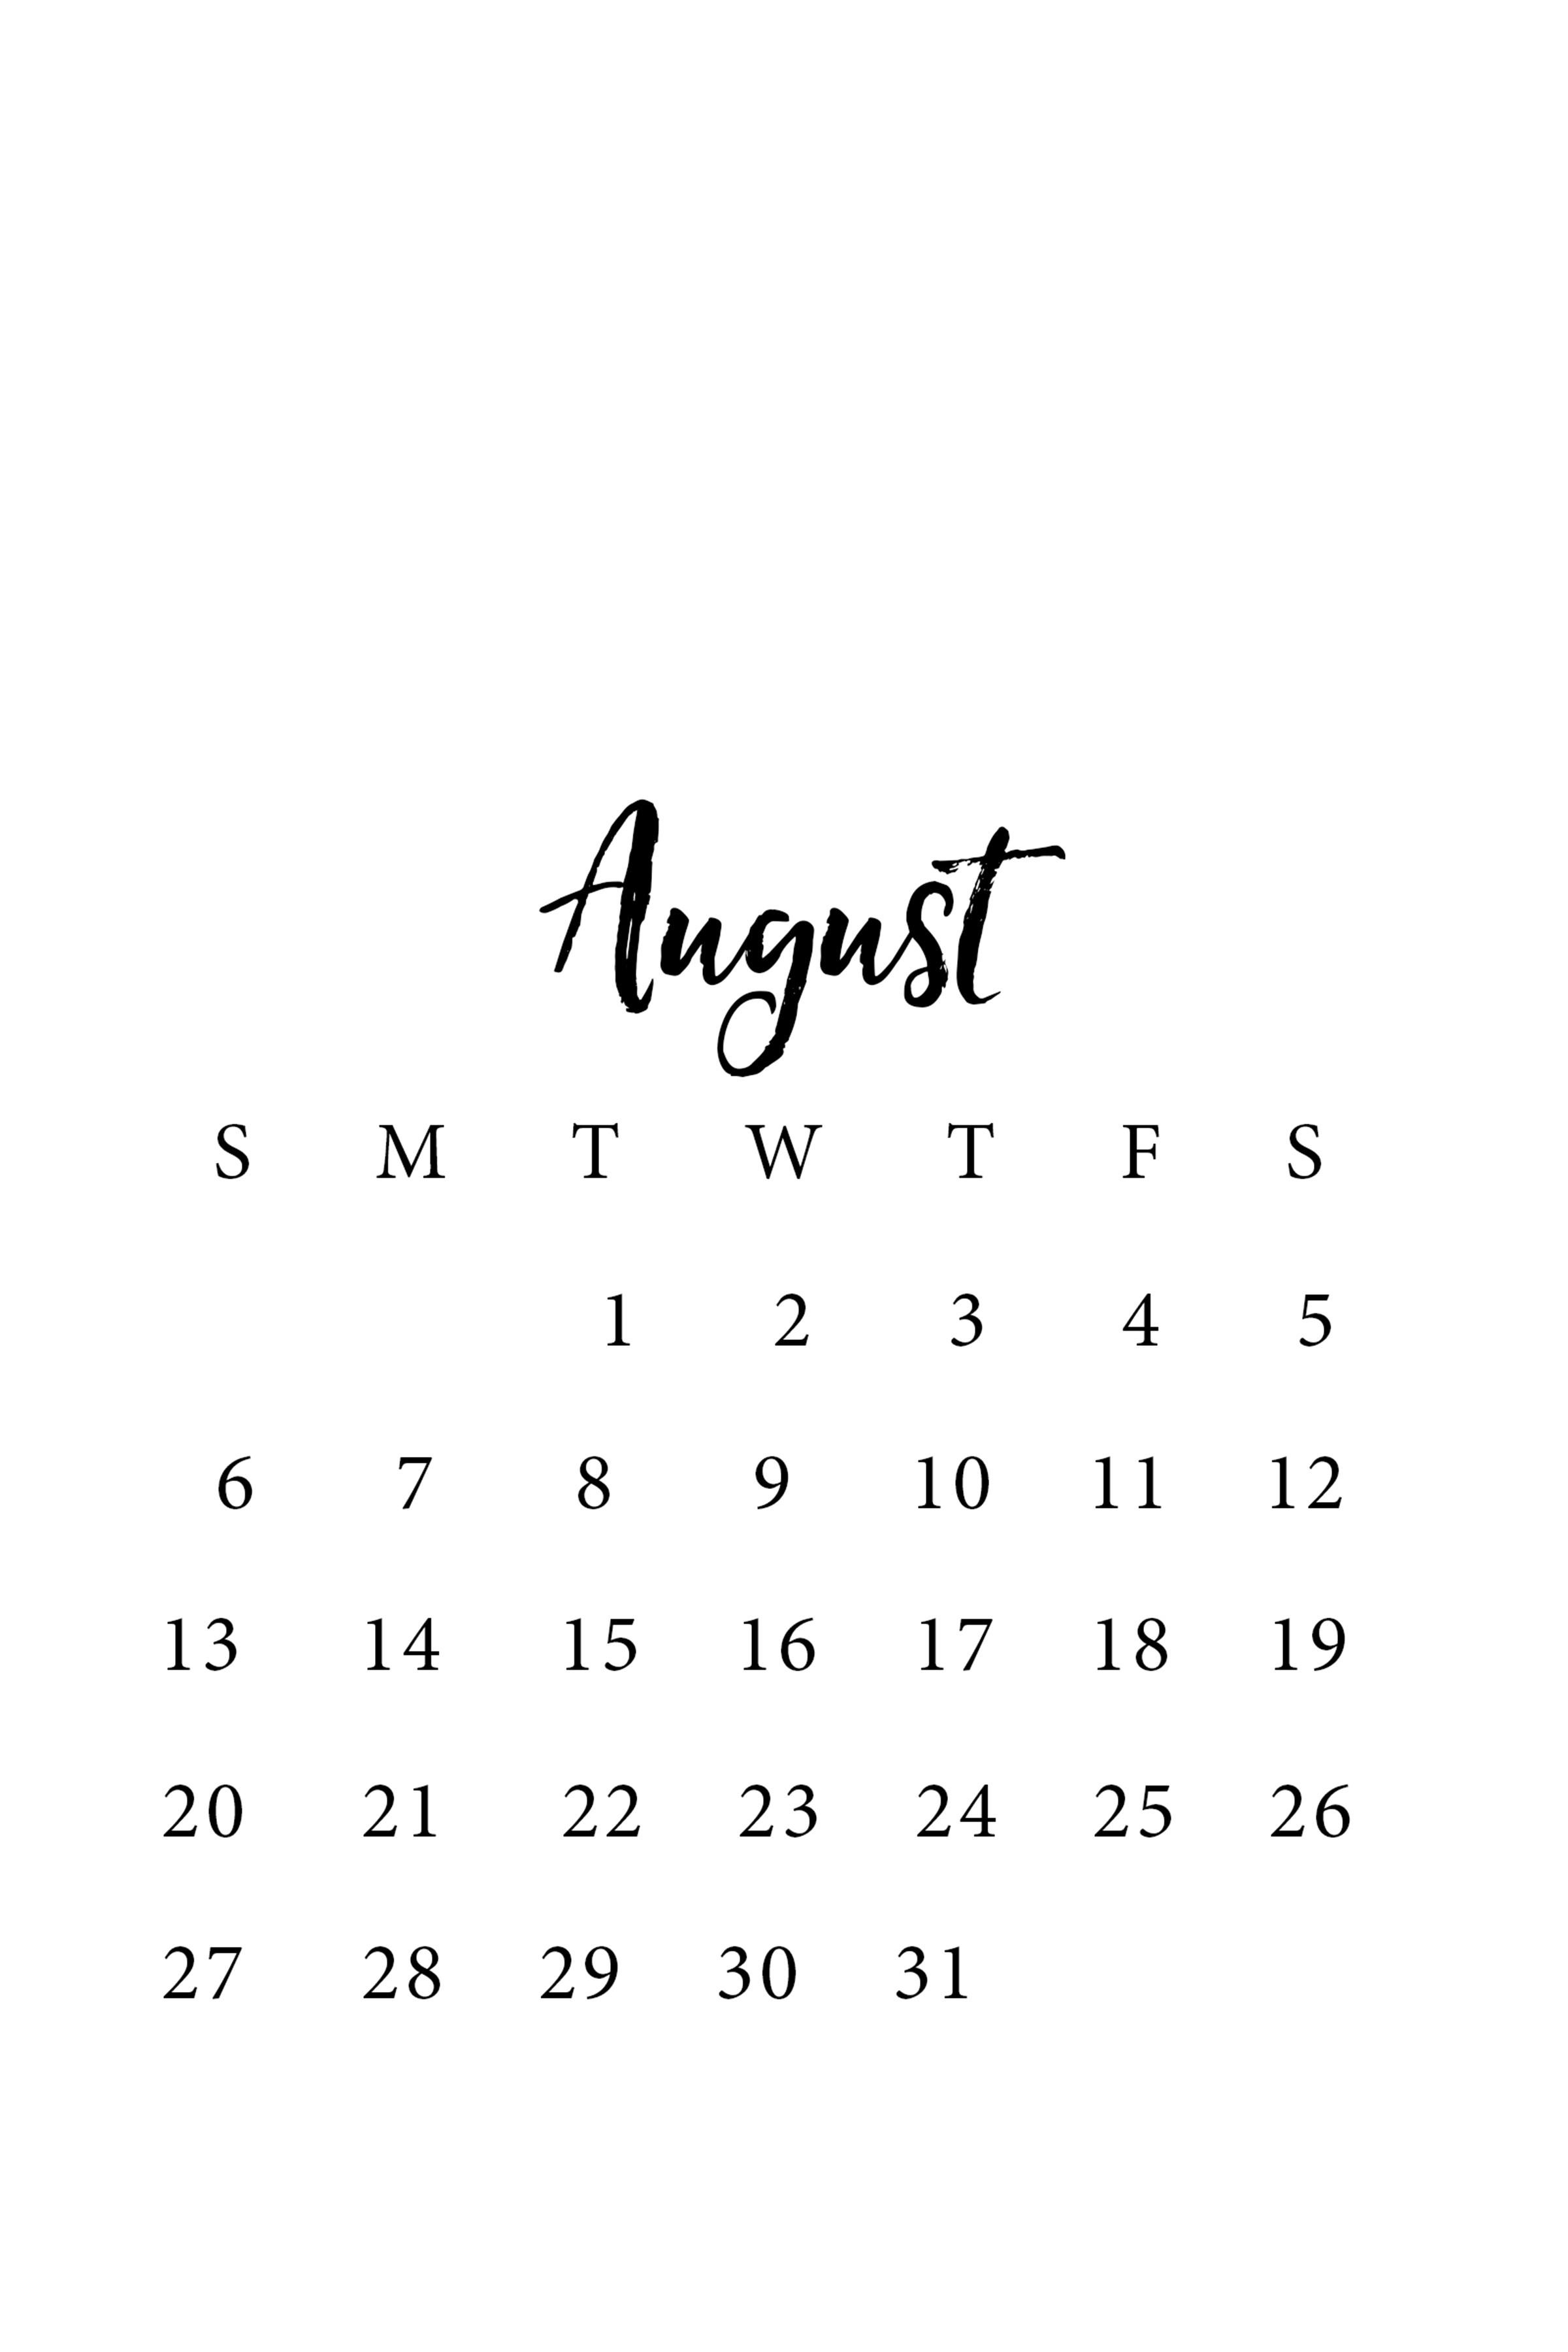 8august